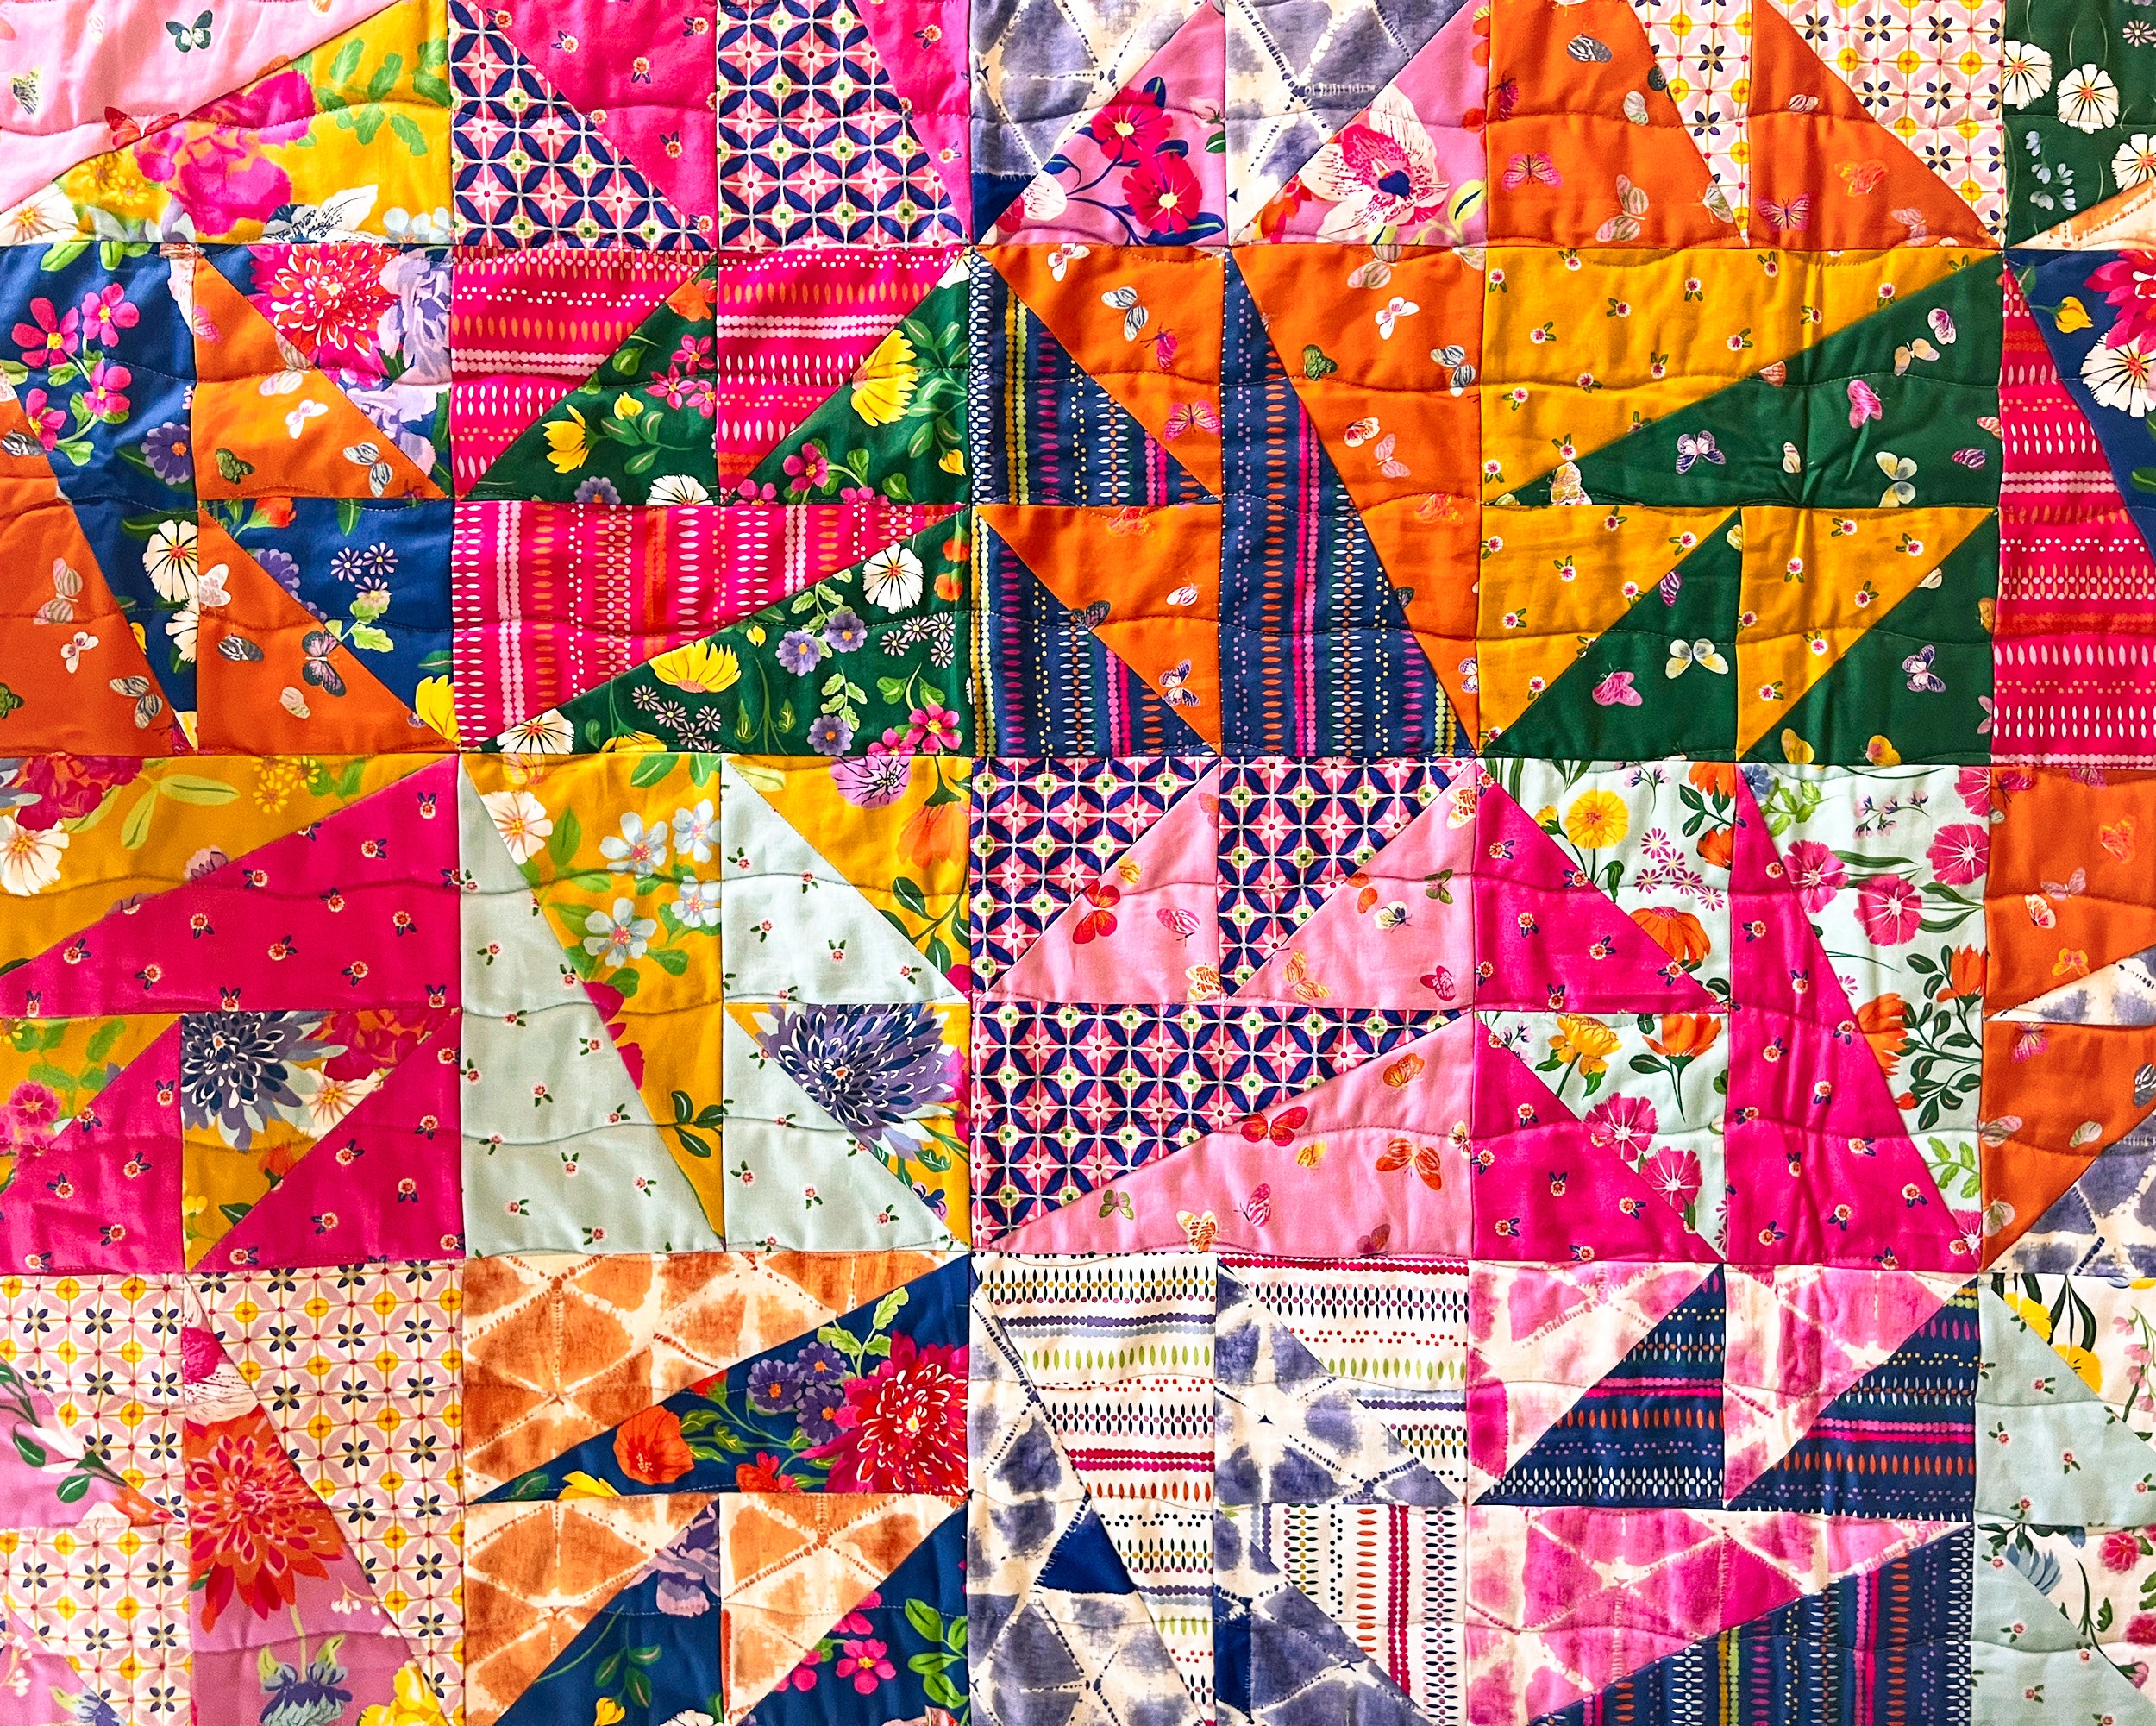 Gettin' Tipsy Quilt close up made with Splendid fabric from Riley Blake Designs